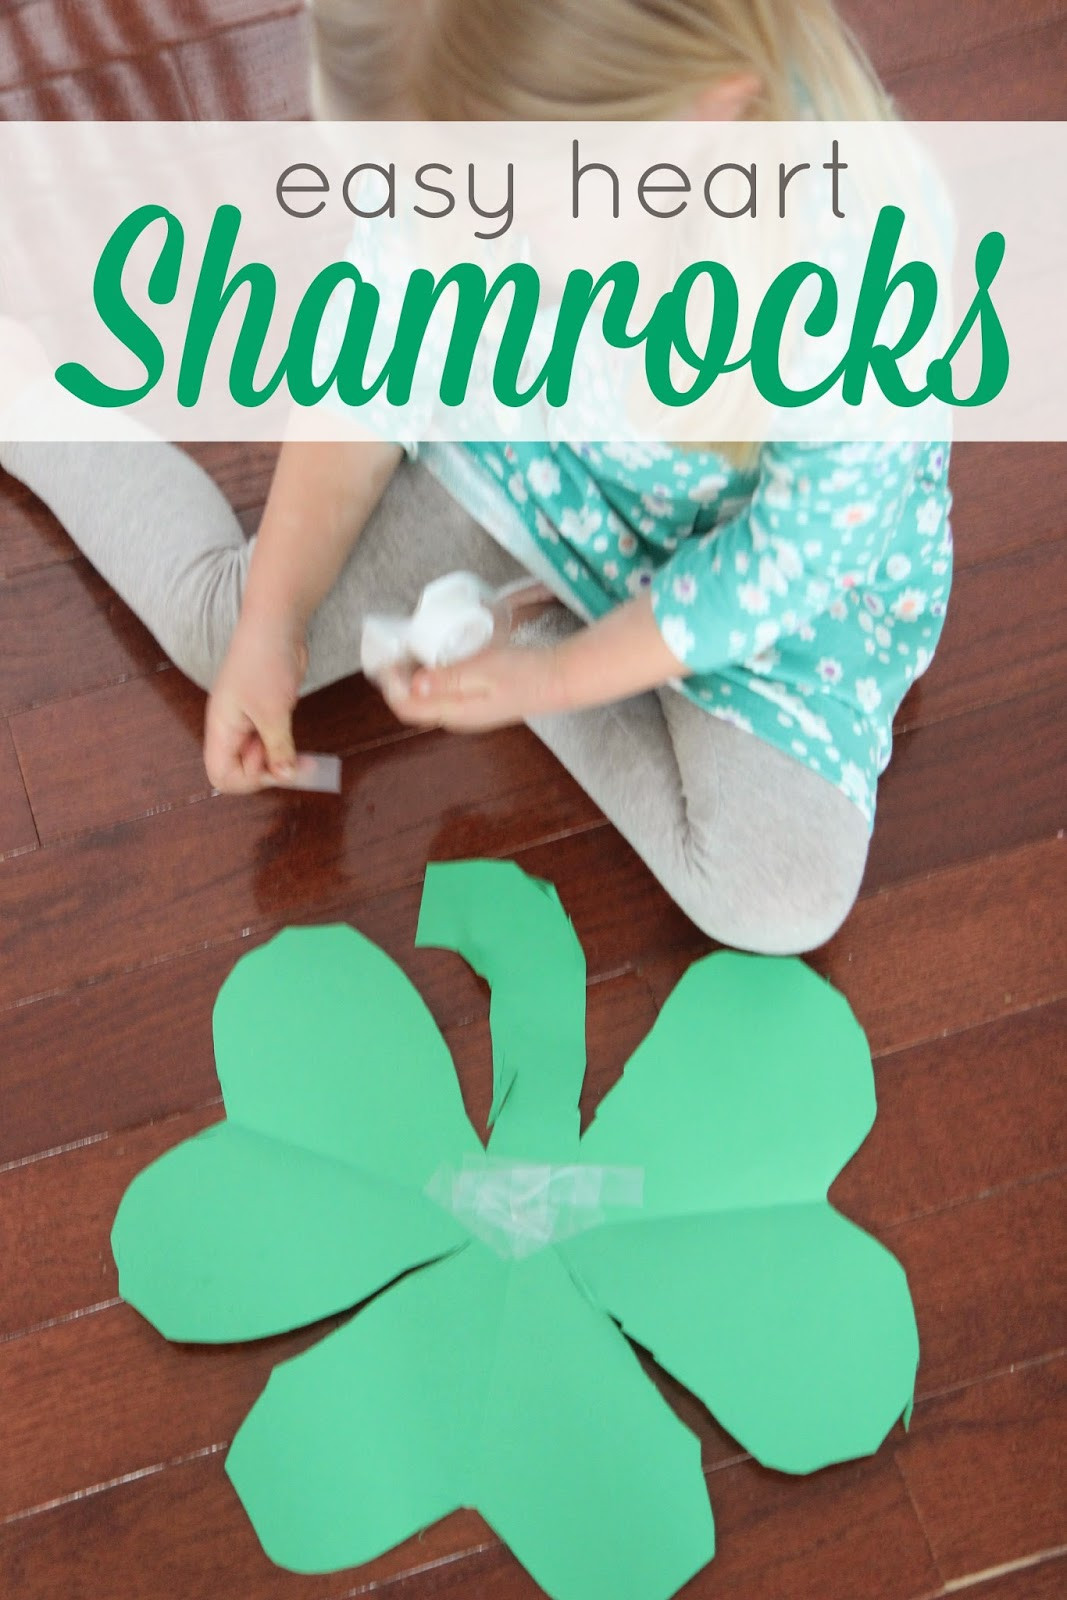 Simple Preschool Crafts
 Toddler Approved 8 Easy St Patrick s Day Crafts for Kids